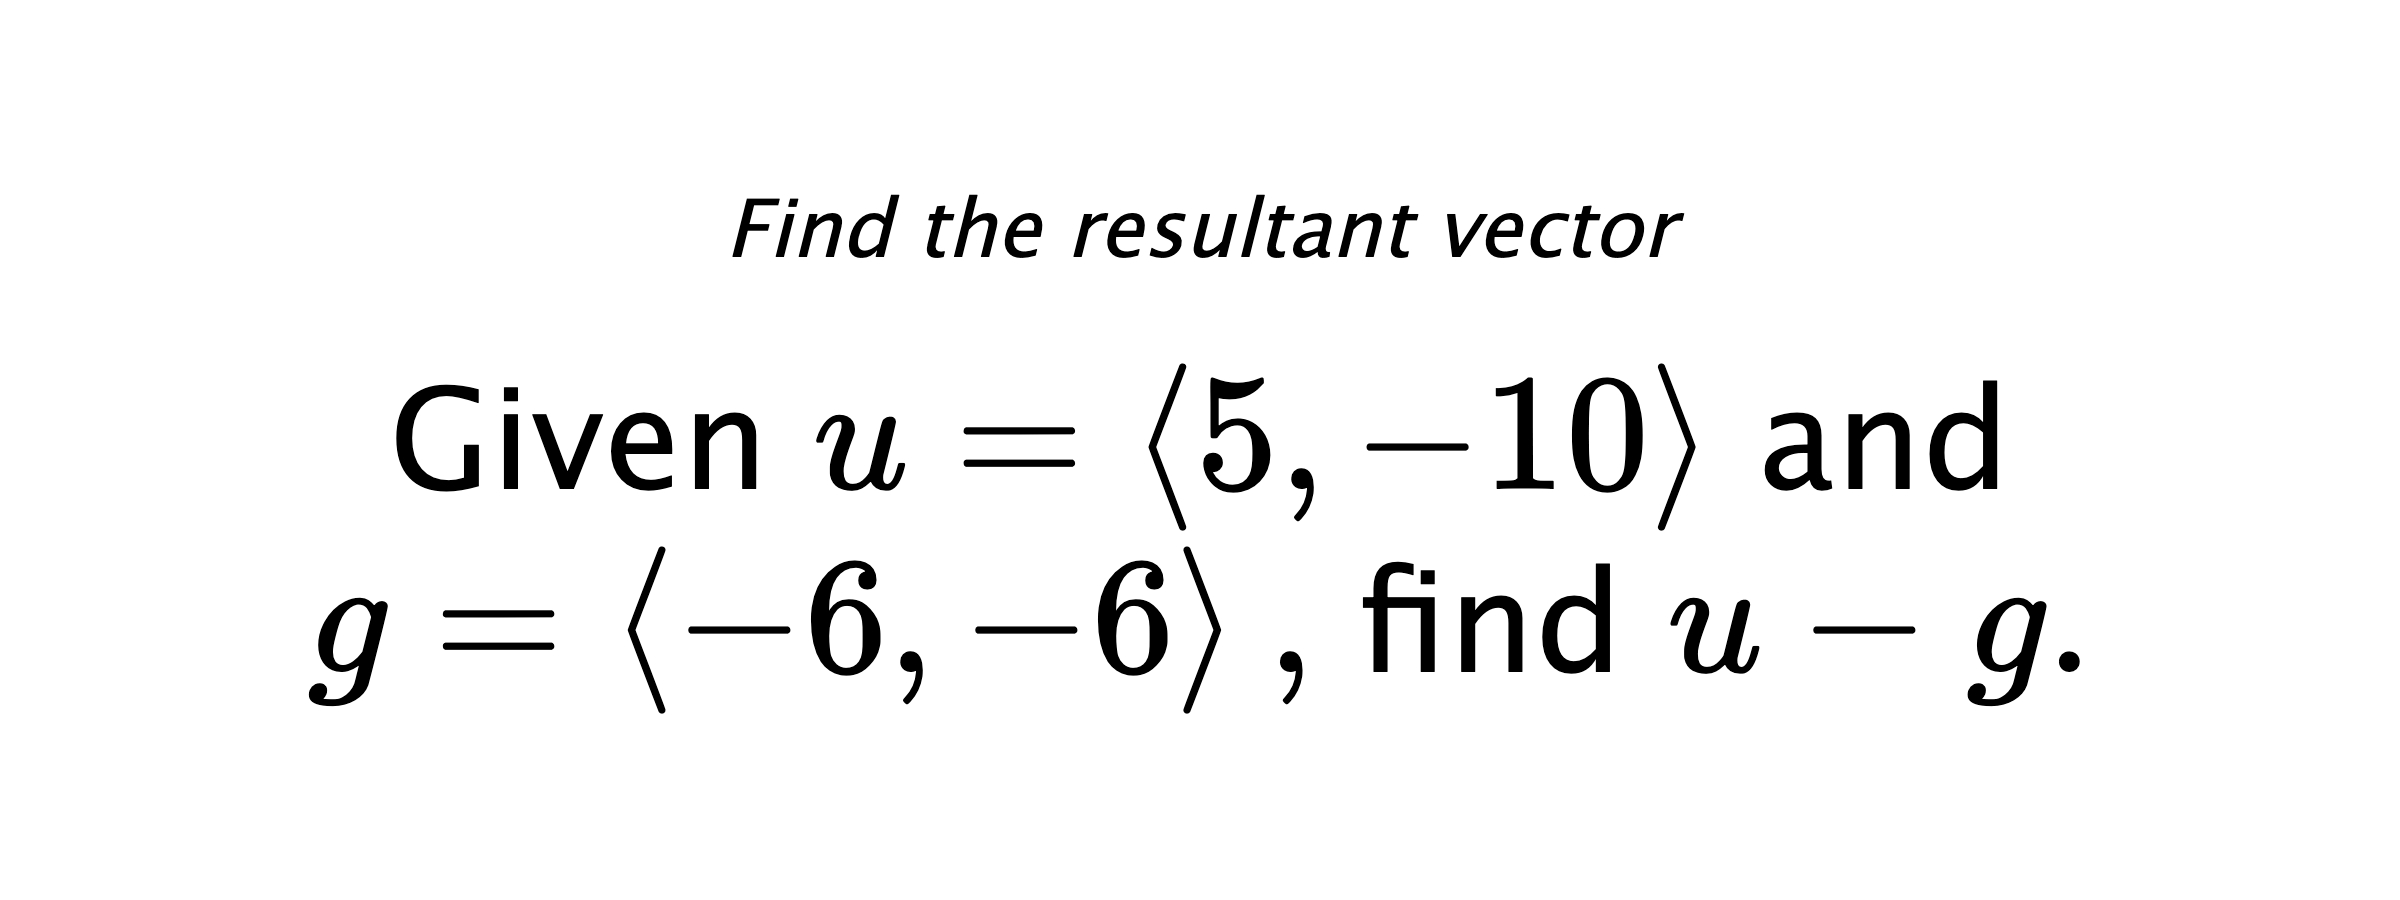 Find the resultant vector Given $ u = \left< 5,-10 \right> $ and $ g = \left< -6,-6 \right> ,$ find $ u-g .$